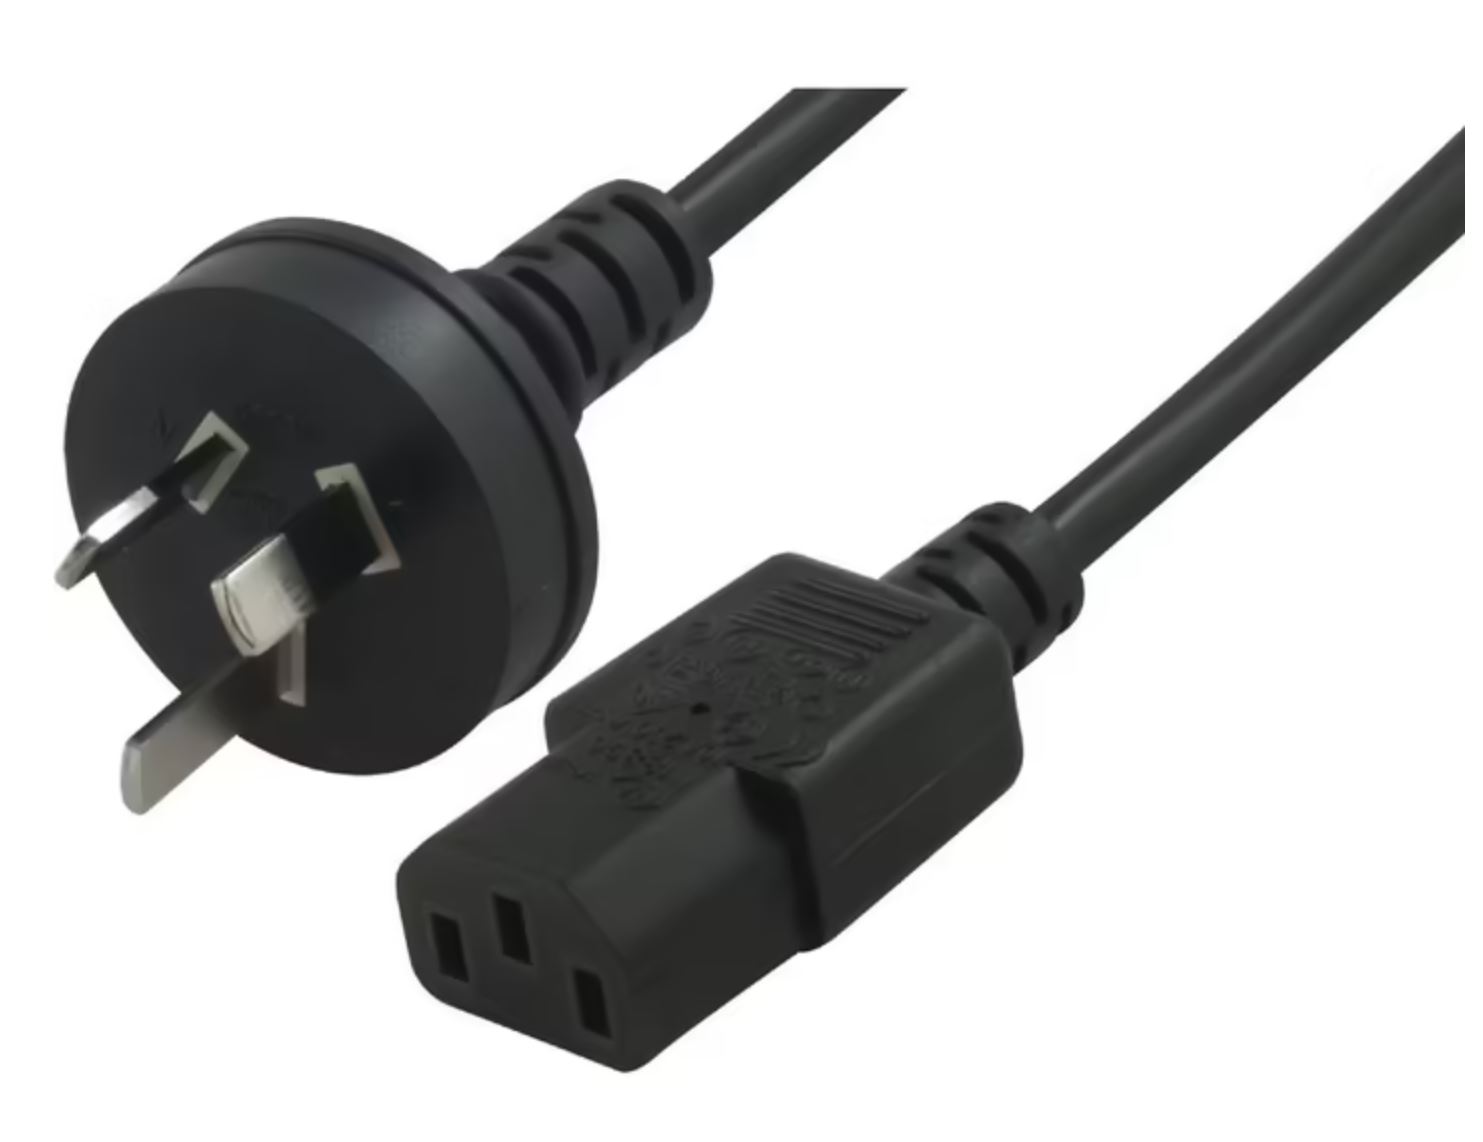 AUS 3-pin 2 metre power cable from Mains to PC Australian Standar...